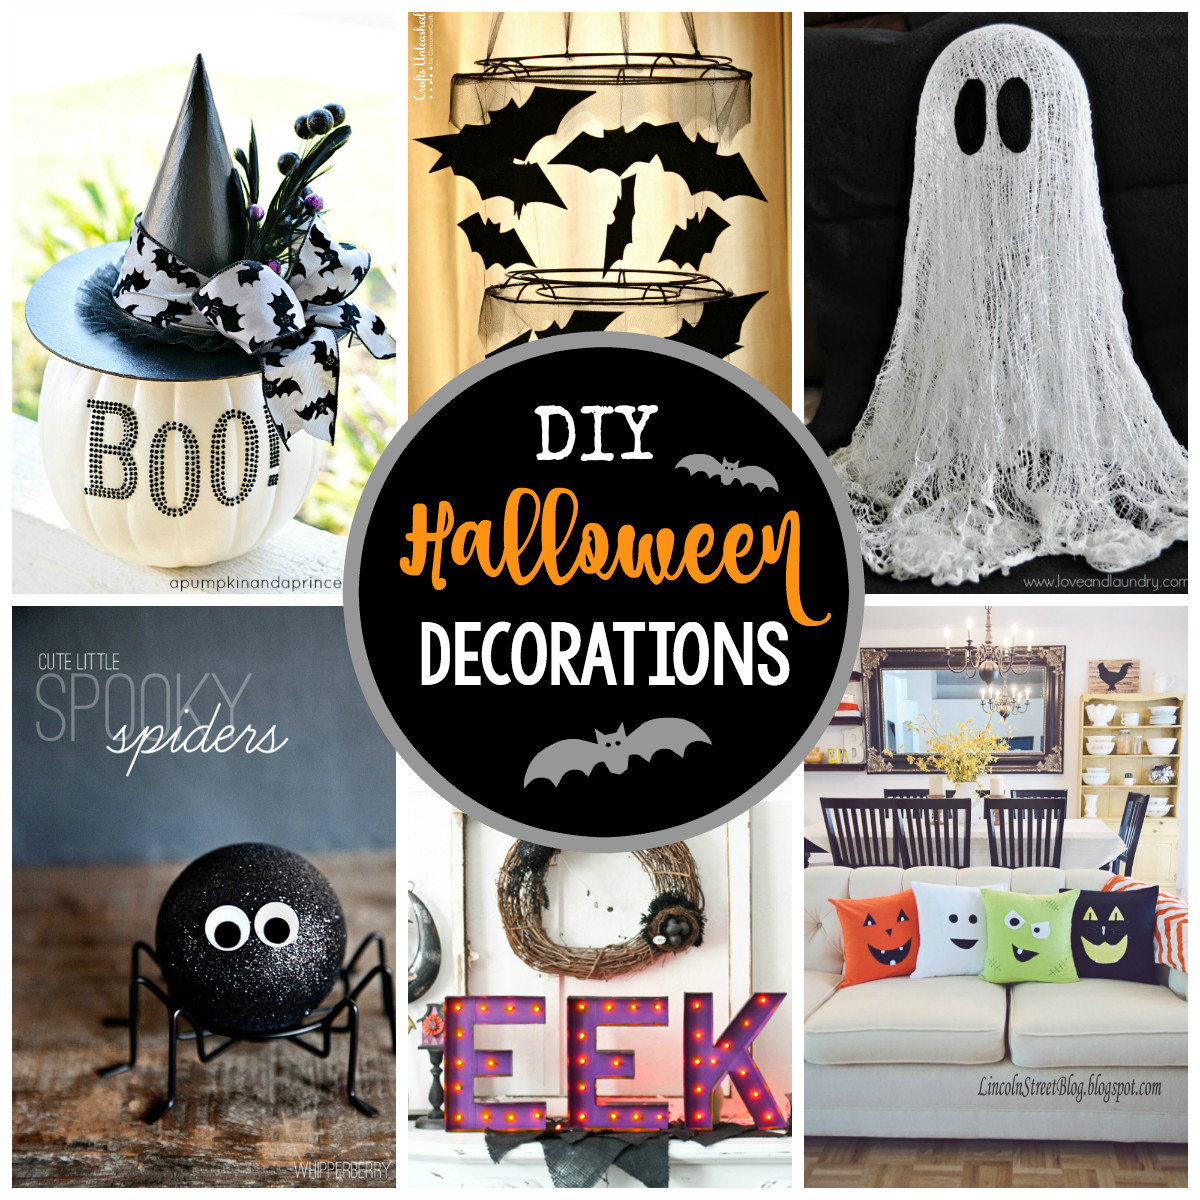 Halloween Decorations Ideas Diy
 25 DIY Halloween Decorations to Make This Year Crazy